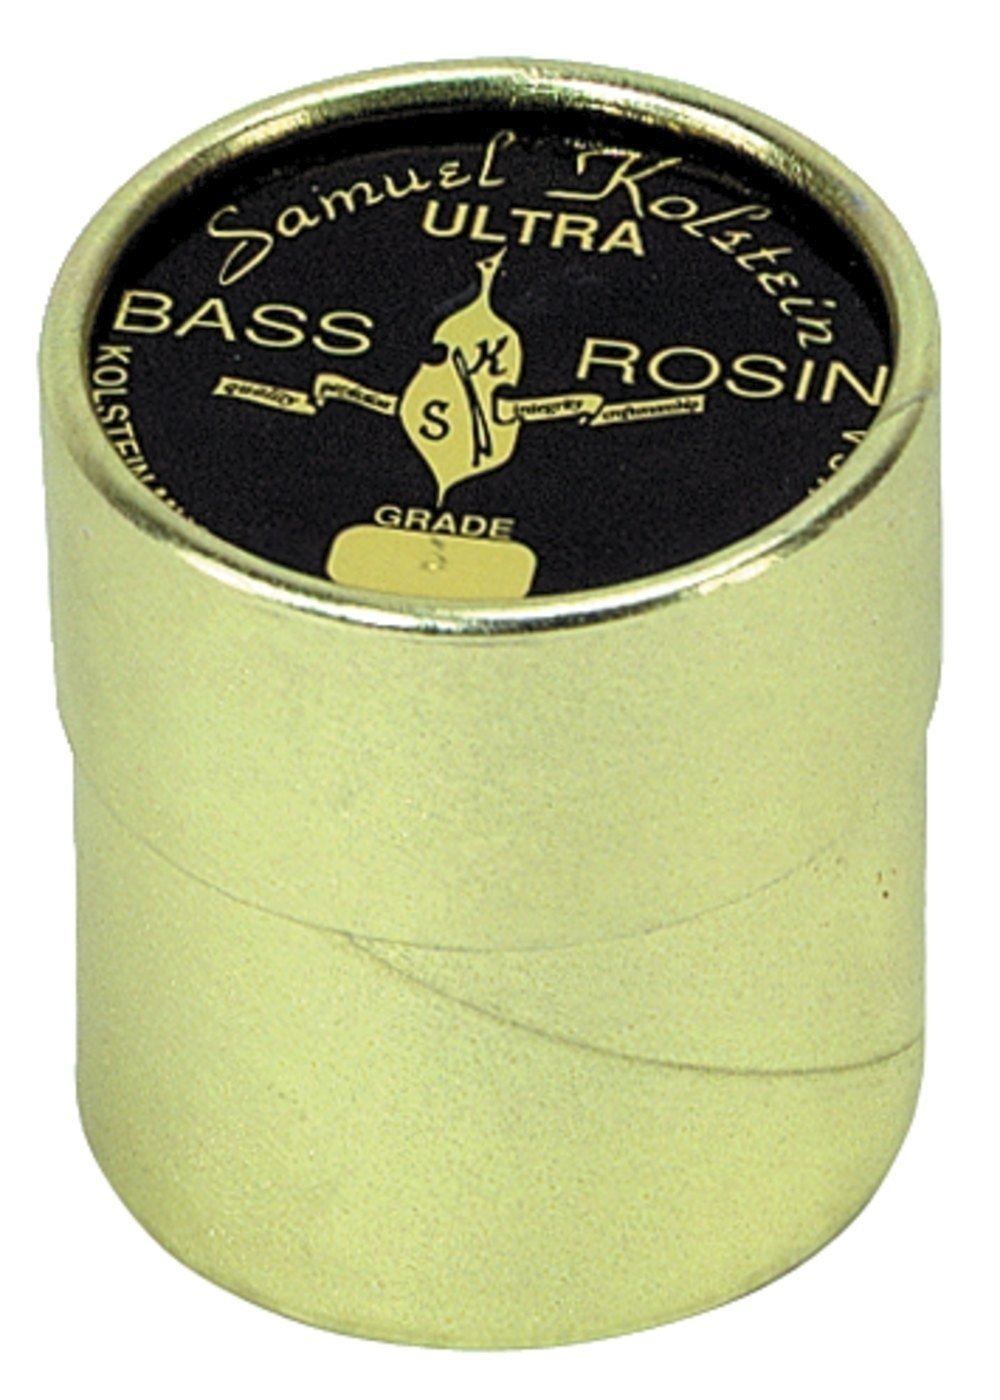 Double bass rosin All-weather